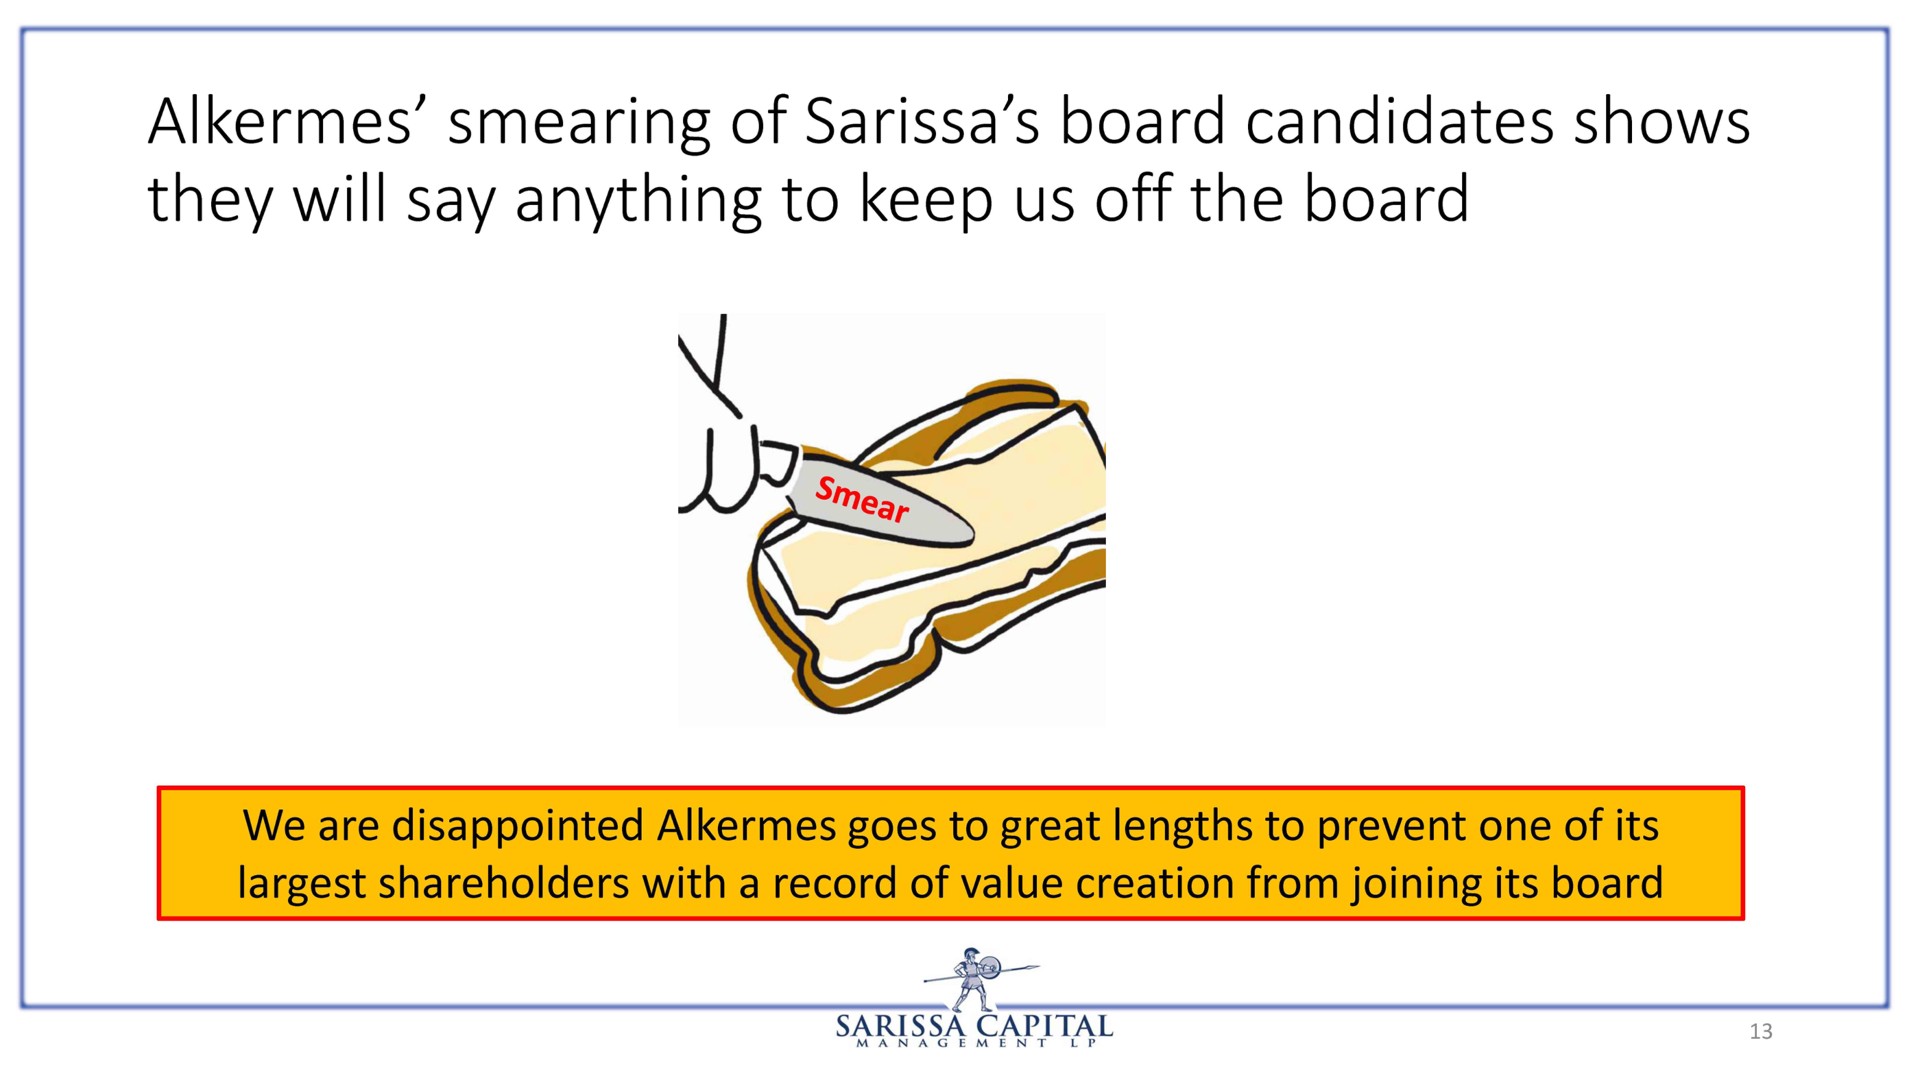 alkermes smearing of board candidates shows they will say anything to keep us off the board | Sarissa Capital